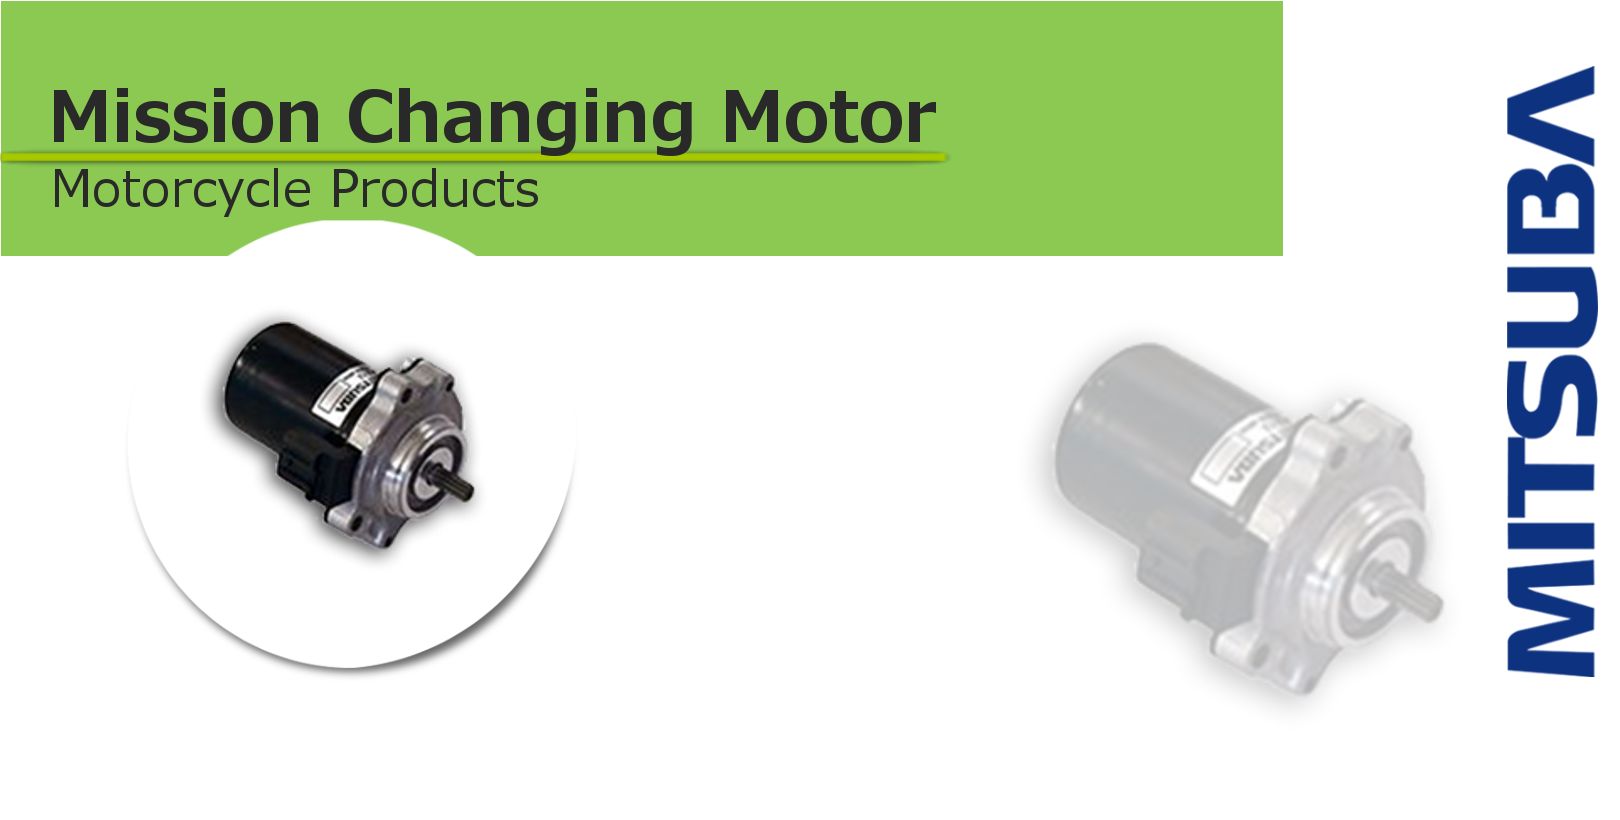 Mission Changing Motor